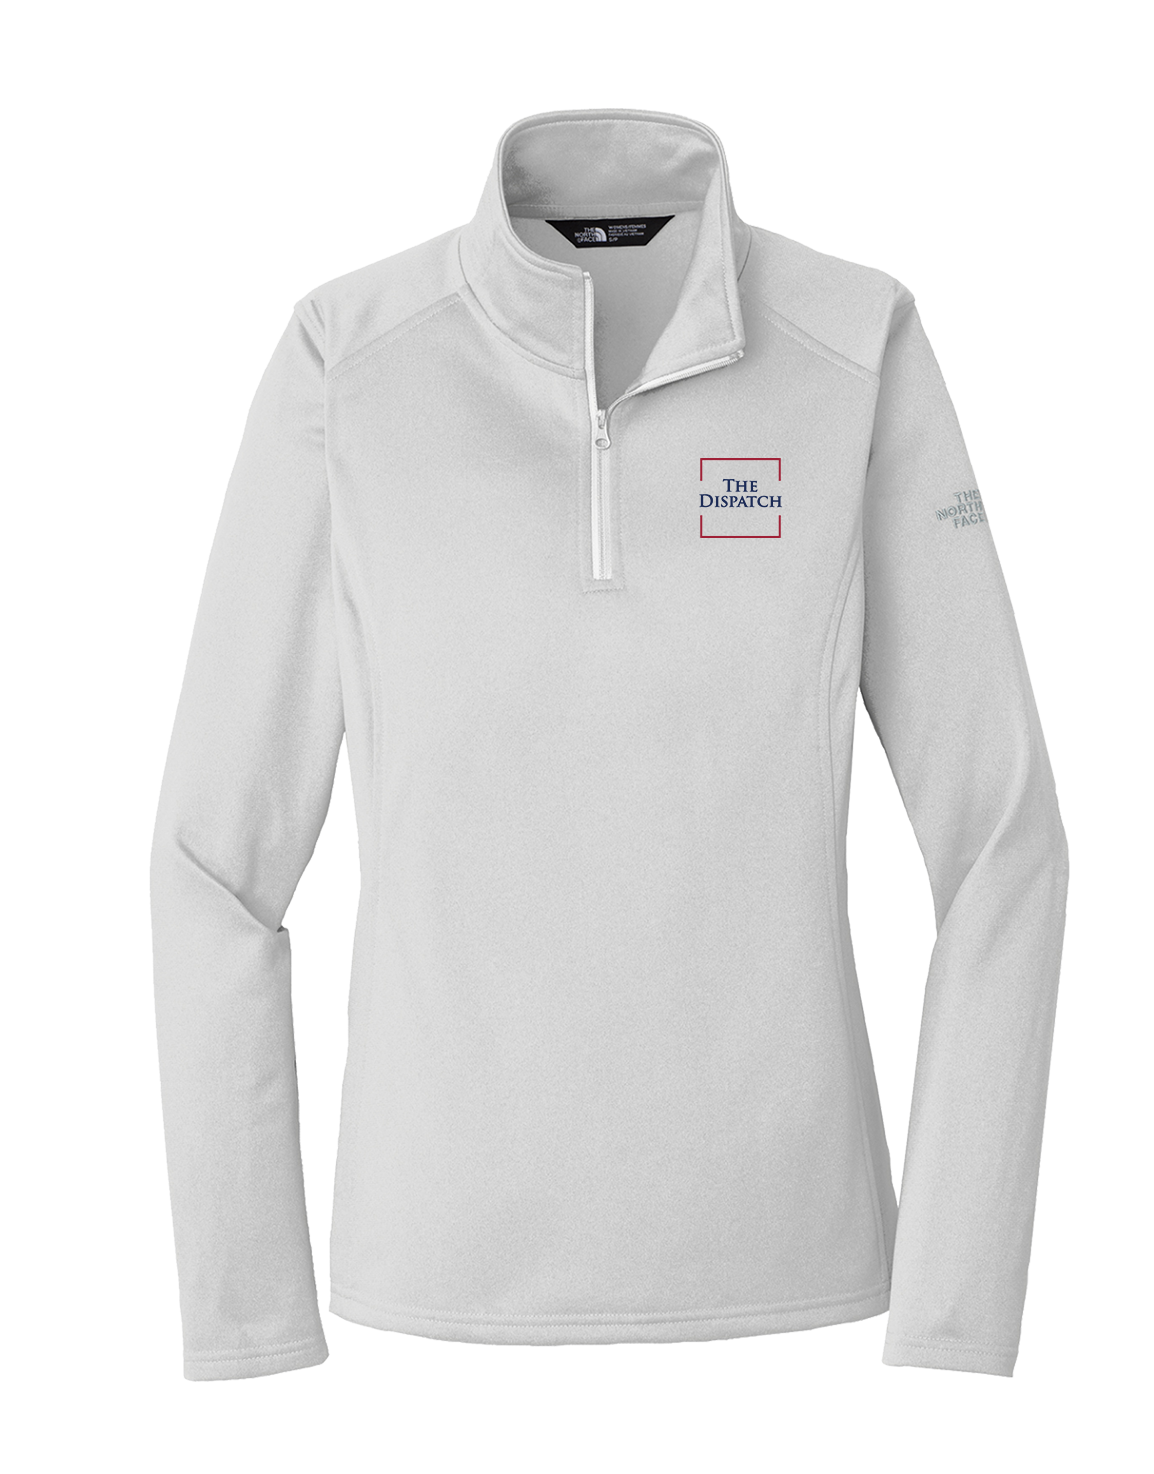 Team - Women's Embroidered North Face Fleece